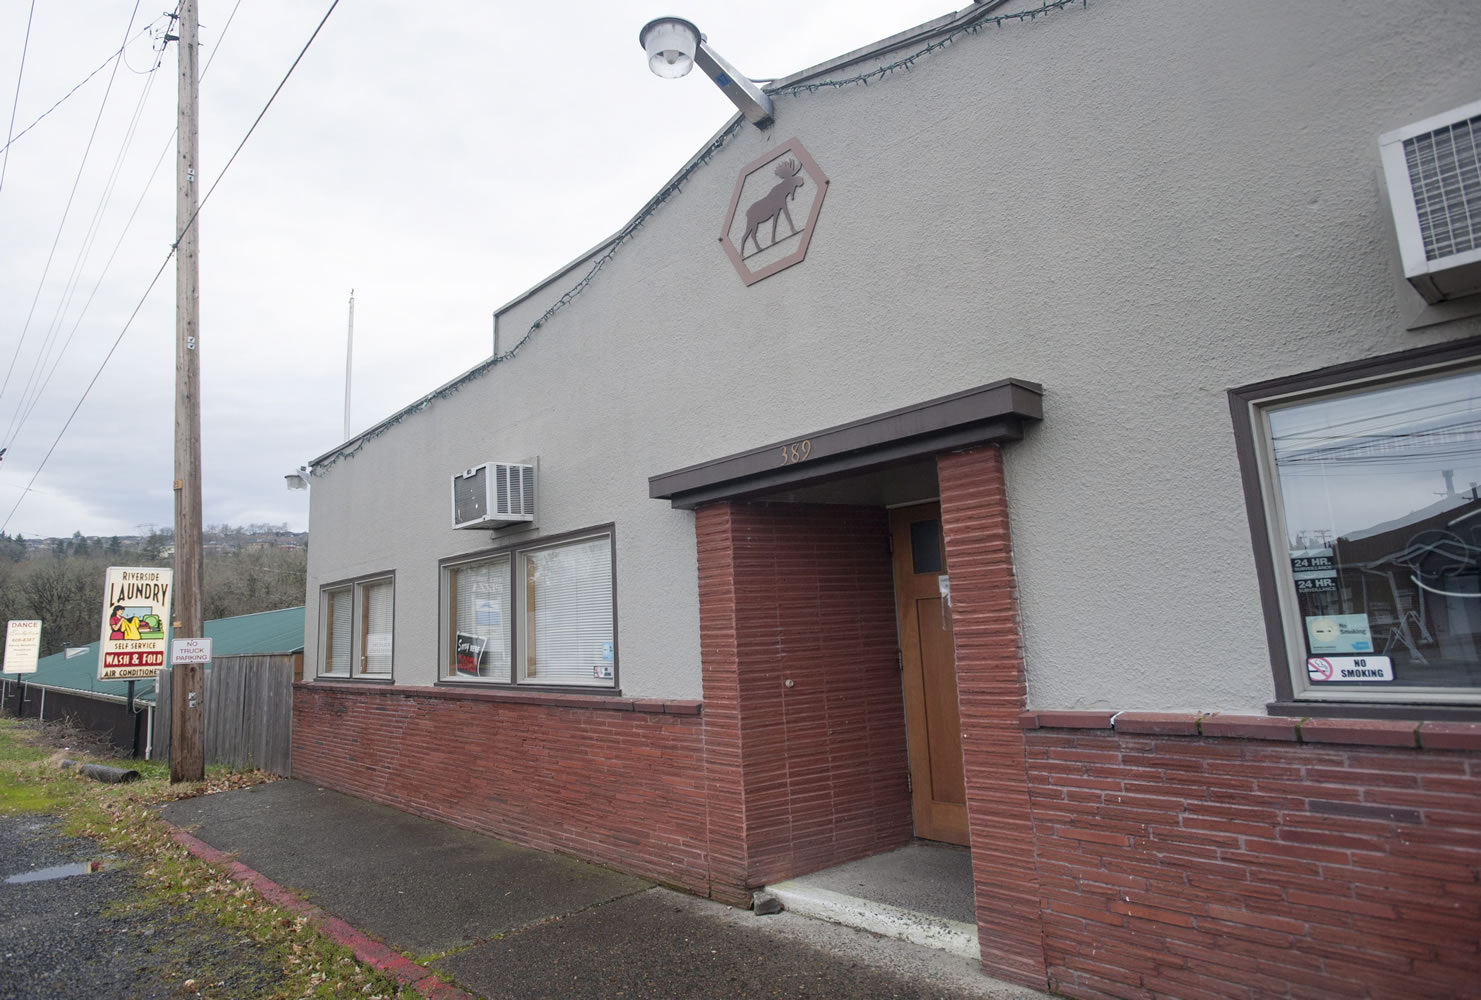 C-W Moose Lodge in limbo (Natalie Behring/The Columbian)